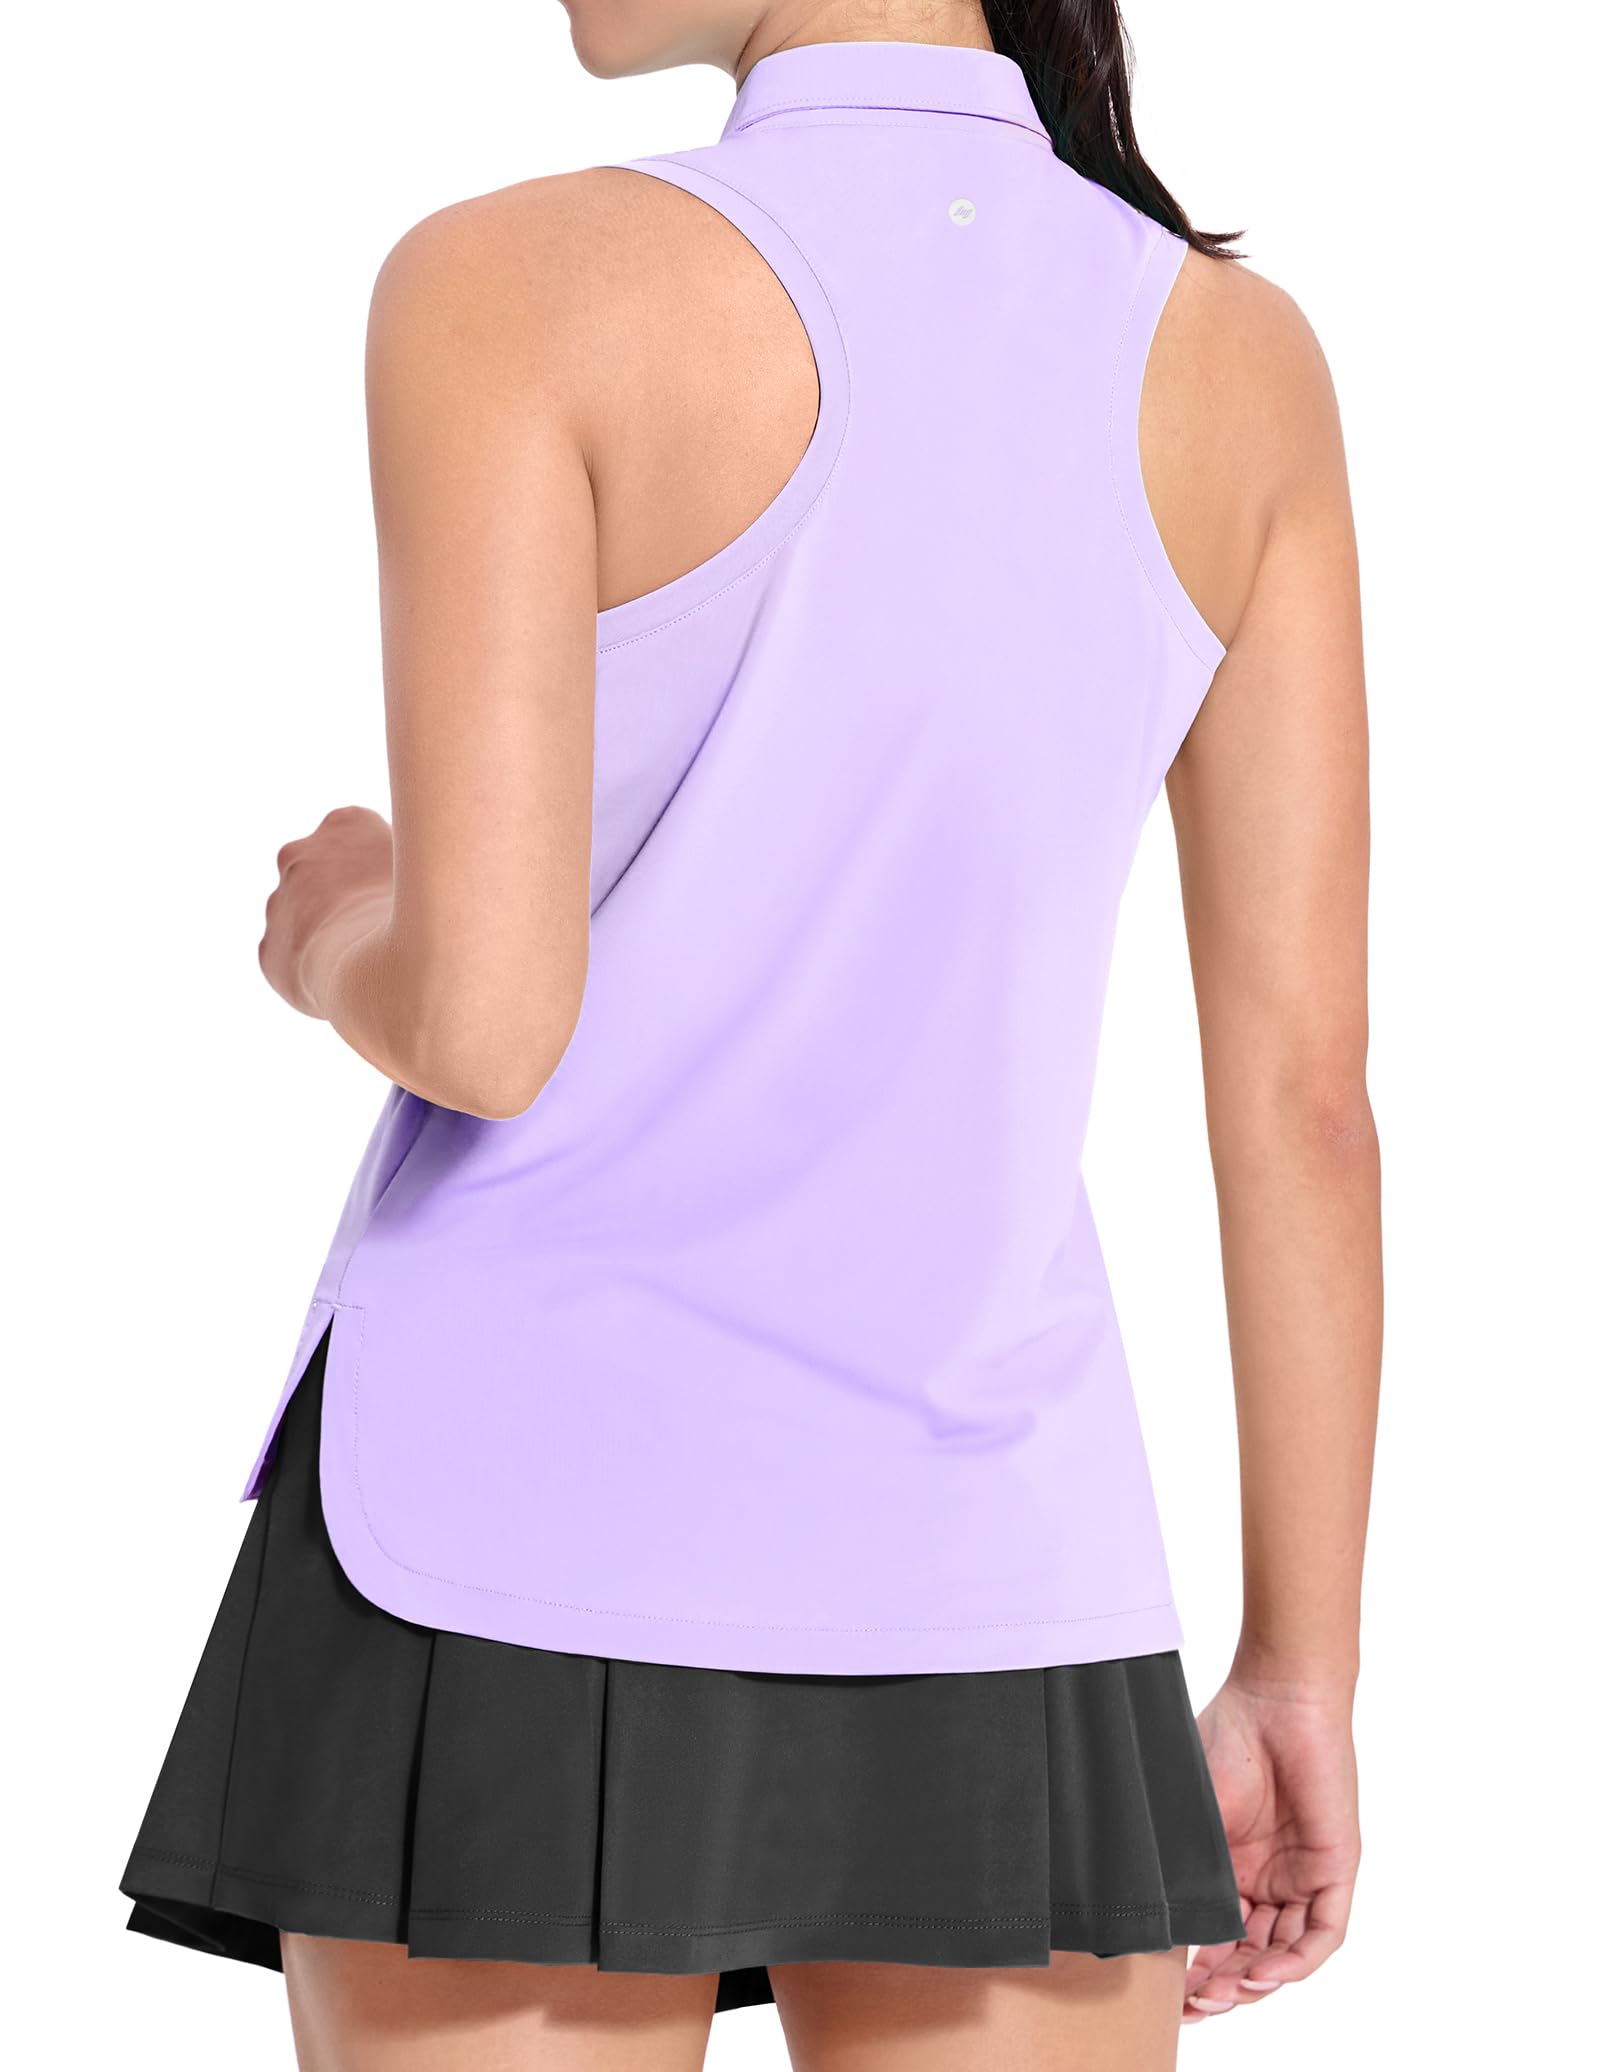 Women's Golf Polo Shirts Sleeveless Dry Fit Collared Tennis Top